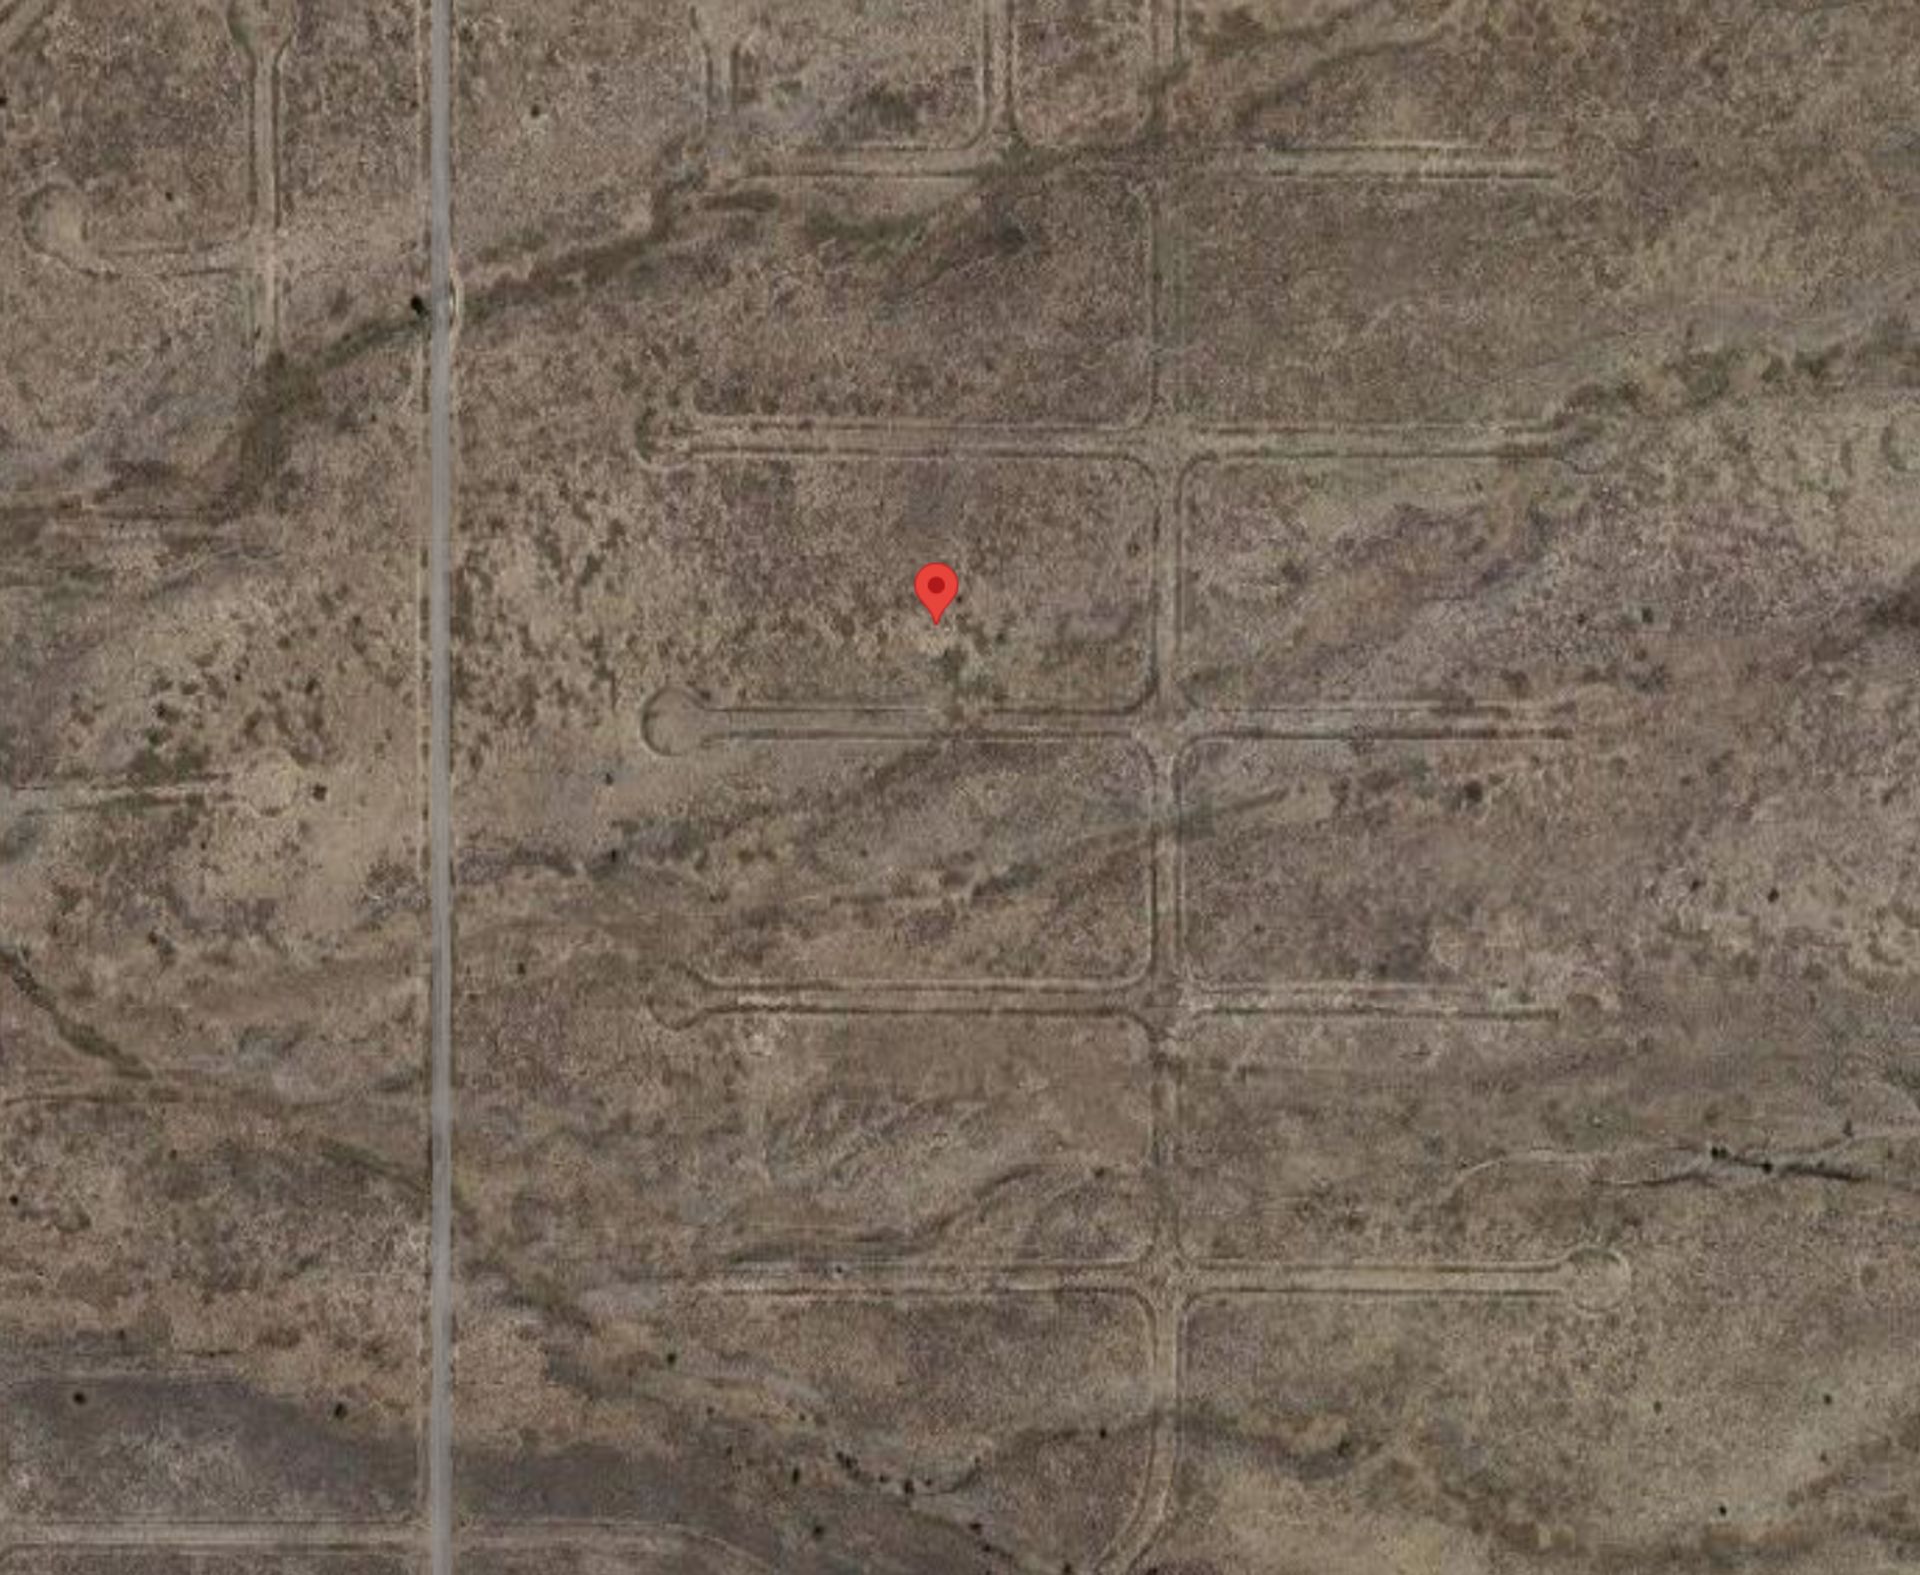 2 Acres in Booming Valencia County, New Mexico! - Image 6 of 12